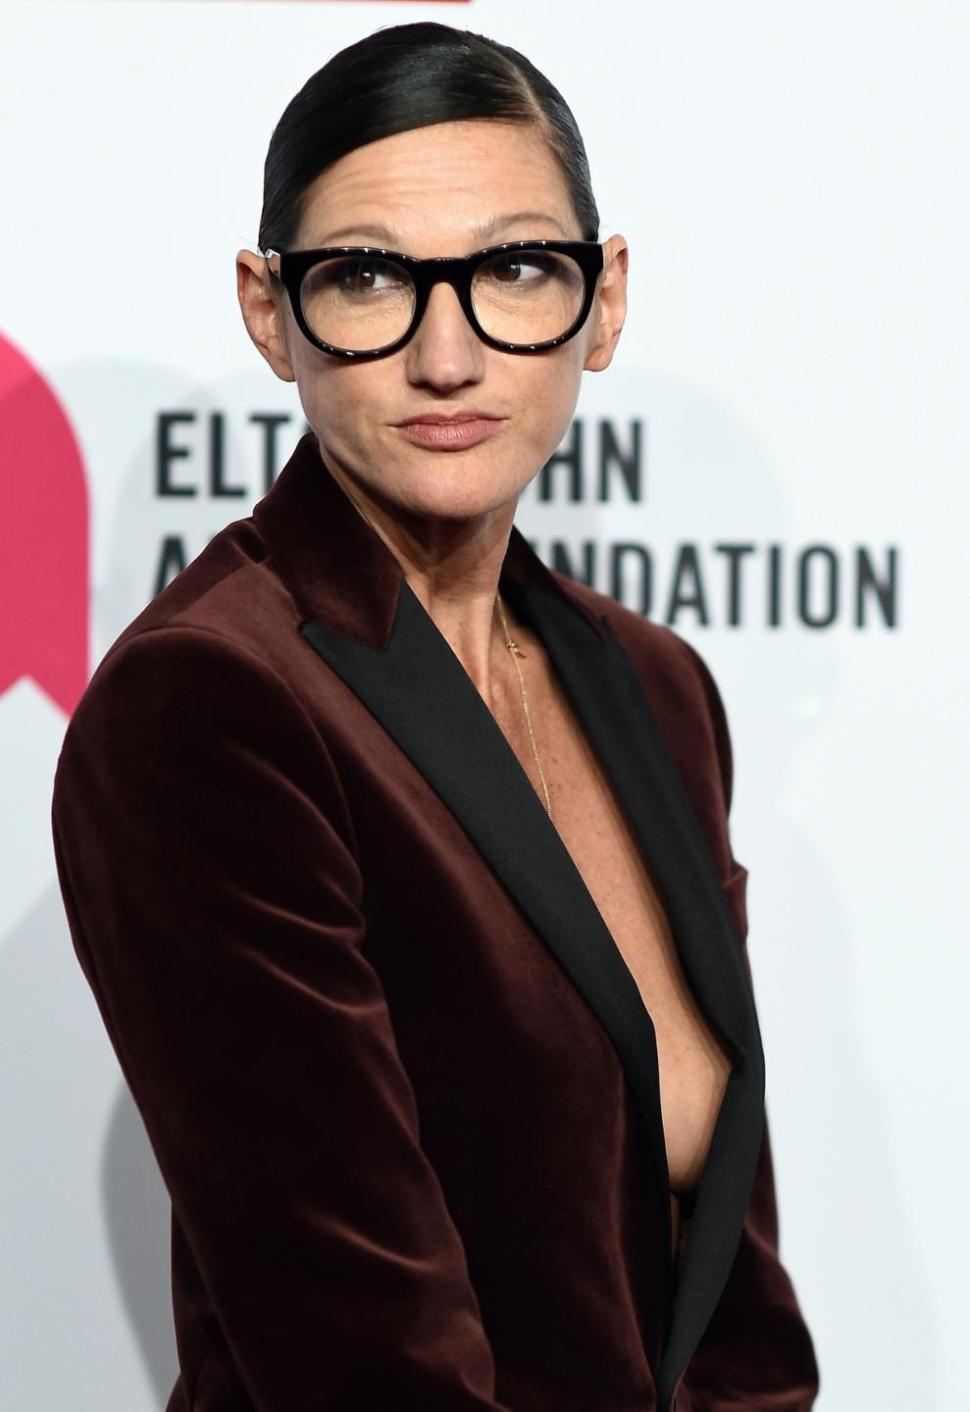 J. Crew creative director Jenna Lyons avoids full disclosure at the Elton John AIDS Foundation’s downtown event.